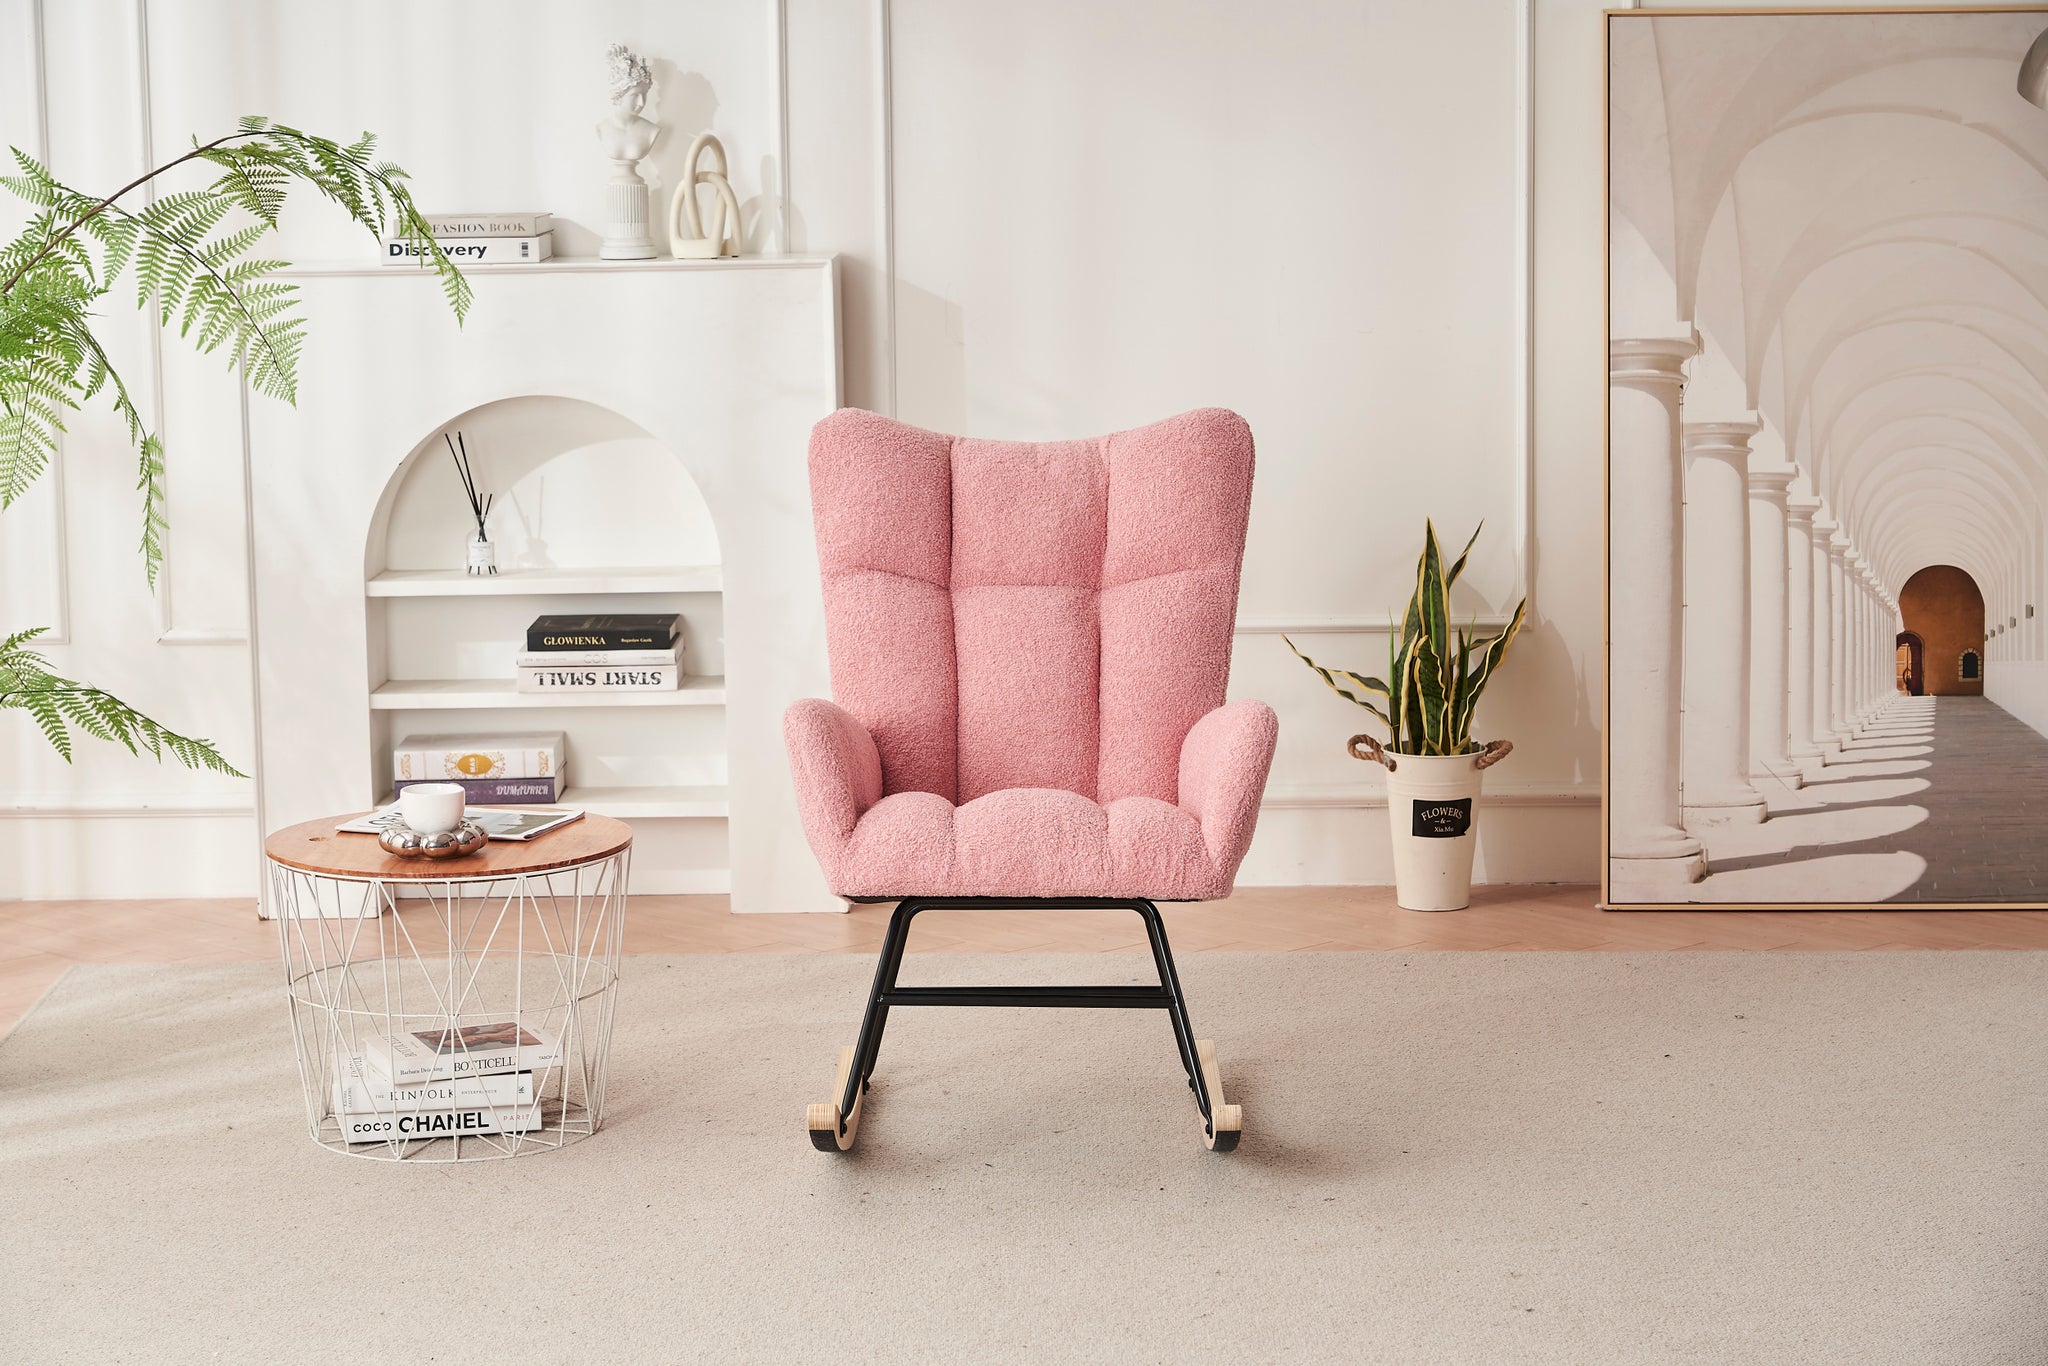 Rocking Chair Nursery, Solid Wood Legs Reading Chair pink-primary living space-modern-rocking